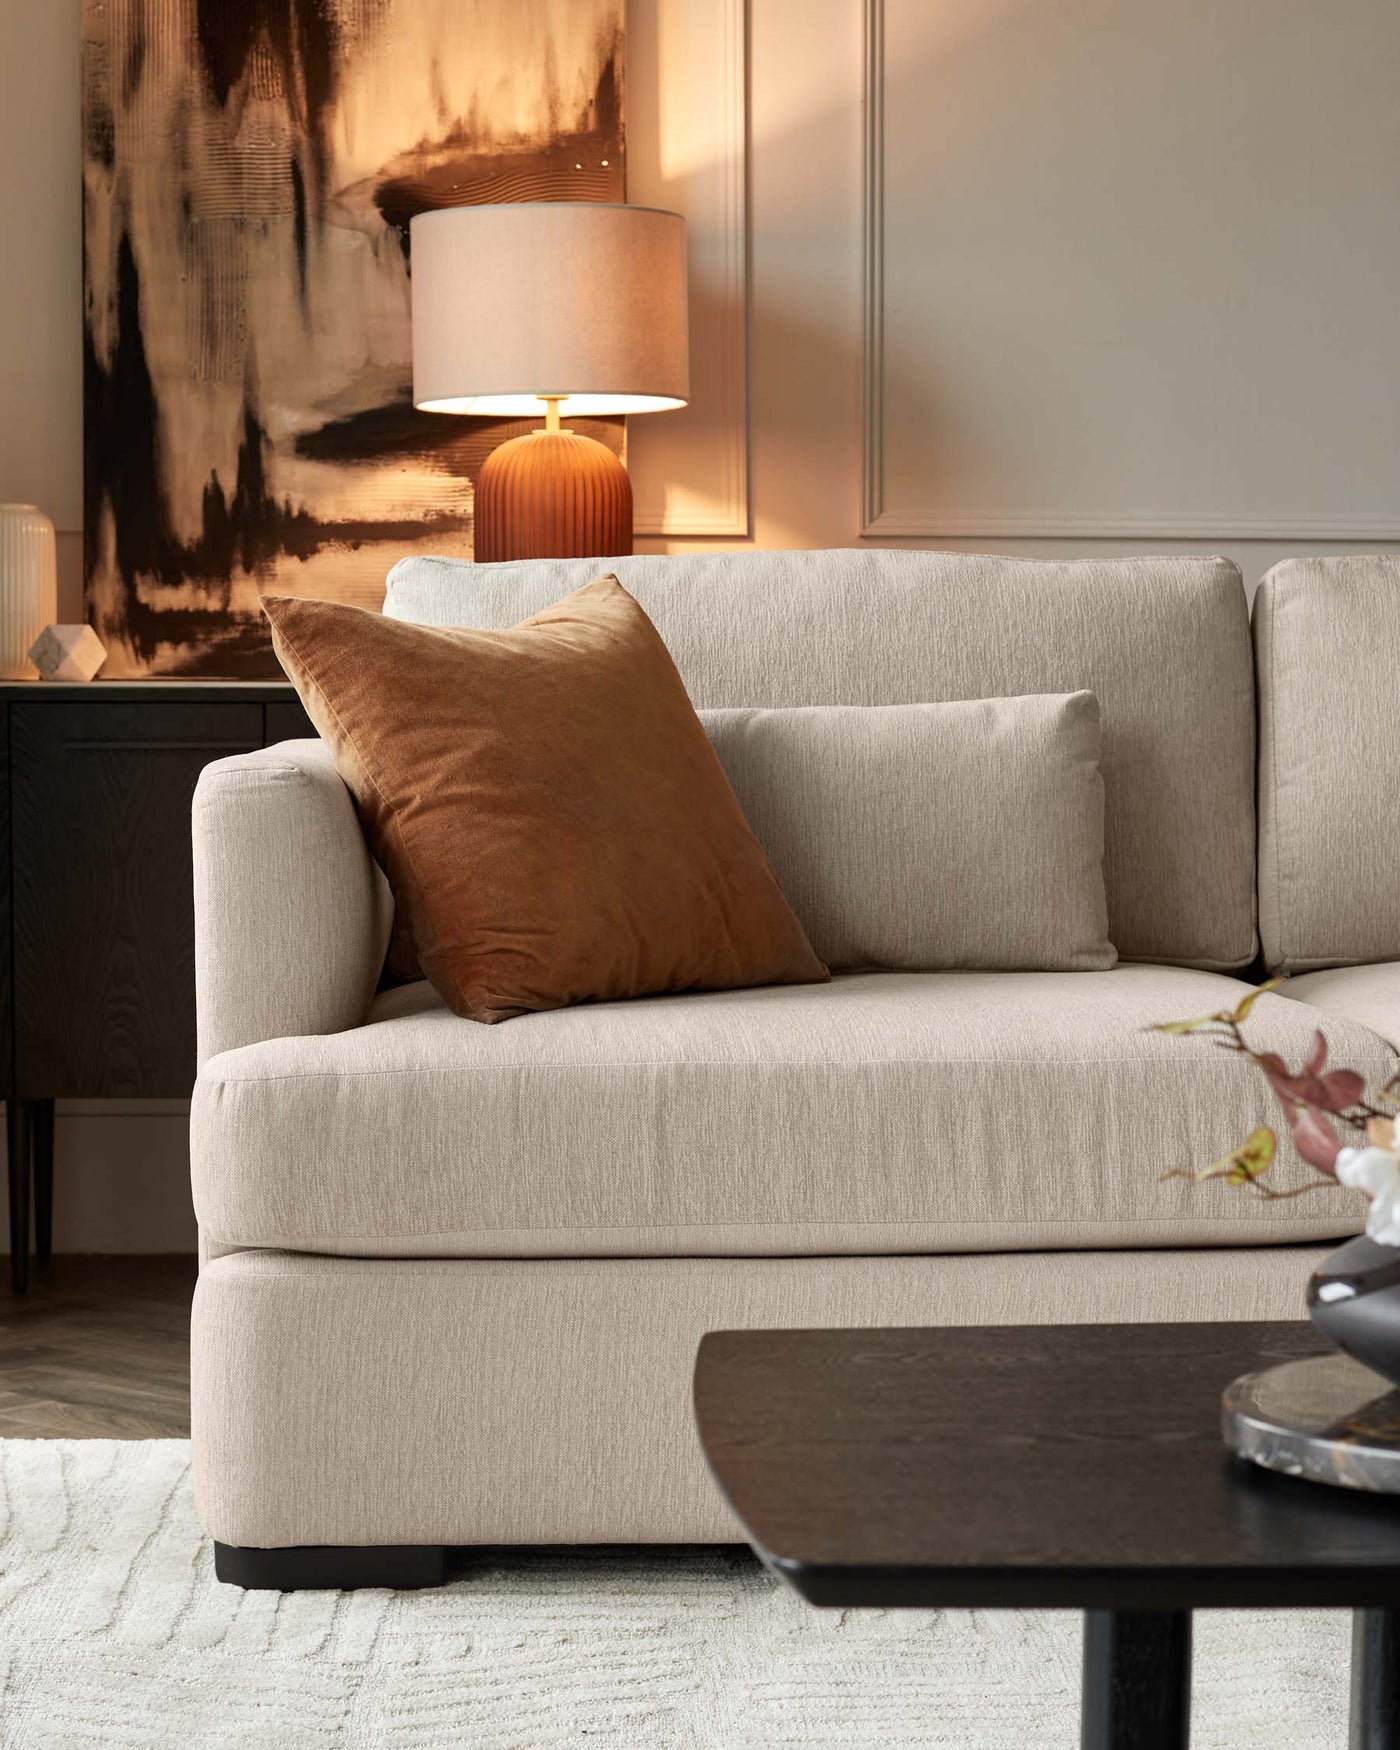 Beige upholstered three-seat sofa with a textured fabric finish, featuring clean lines and minimalistic design, complemented with a solid brown decorative pillow. Beside it, a dark wood side table with a visible drawer, supporting a ceramic base table lamp with a textured design and a beige lampshade. In the foreground, a part of a dark wooden coffee table with a rounded edge is visible. The setting is enhanced by a cream-colored textured area rug beneath the furniture.